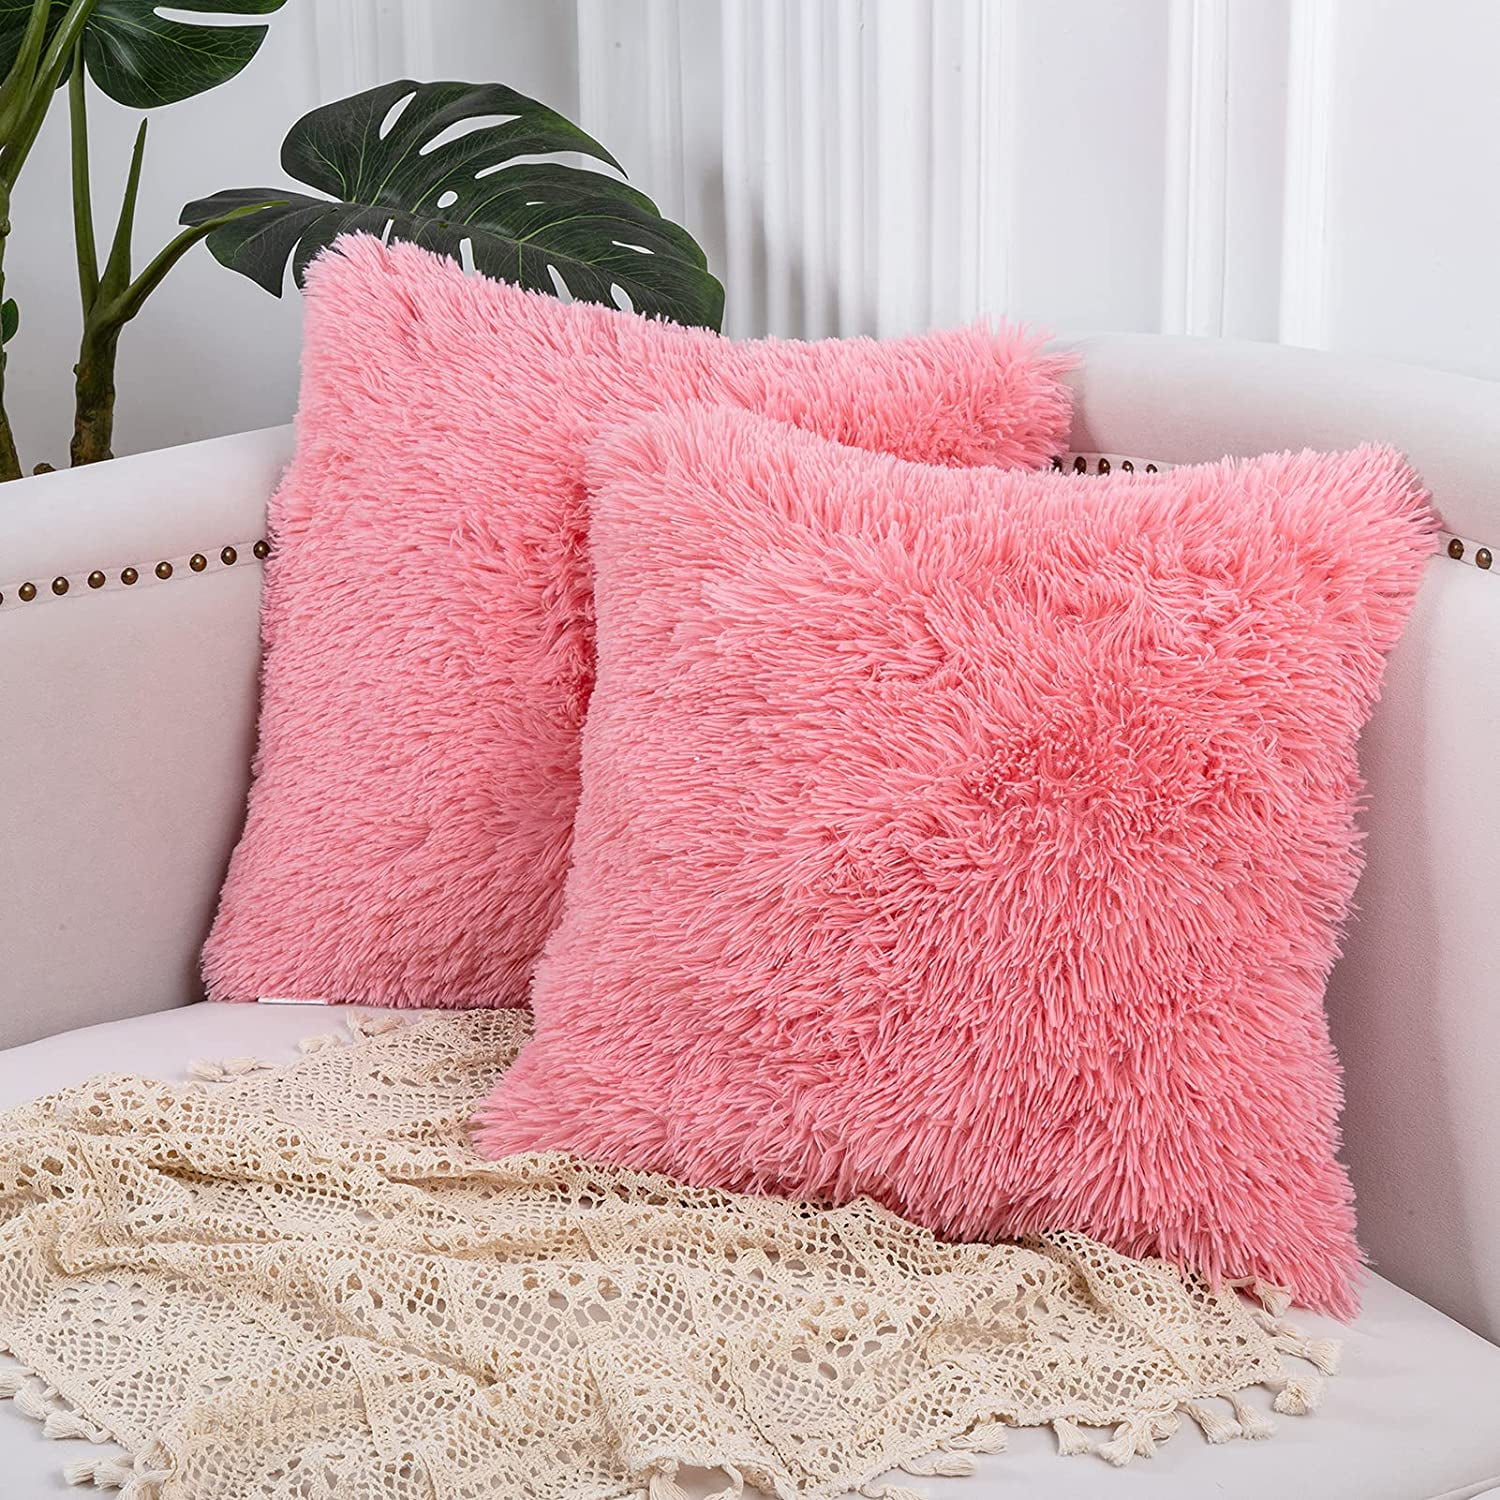 Details about   Luxury Fluffy Fur Cushion Covers Soft Pillow Case Plush Home Sofa Decoration NEW 